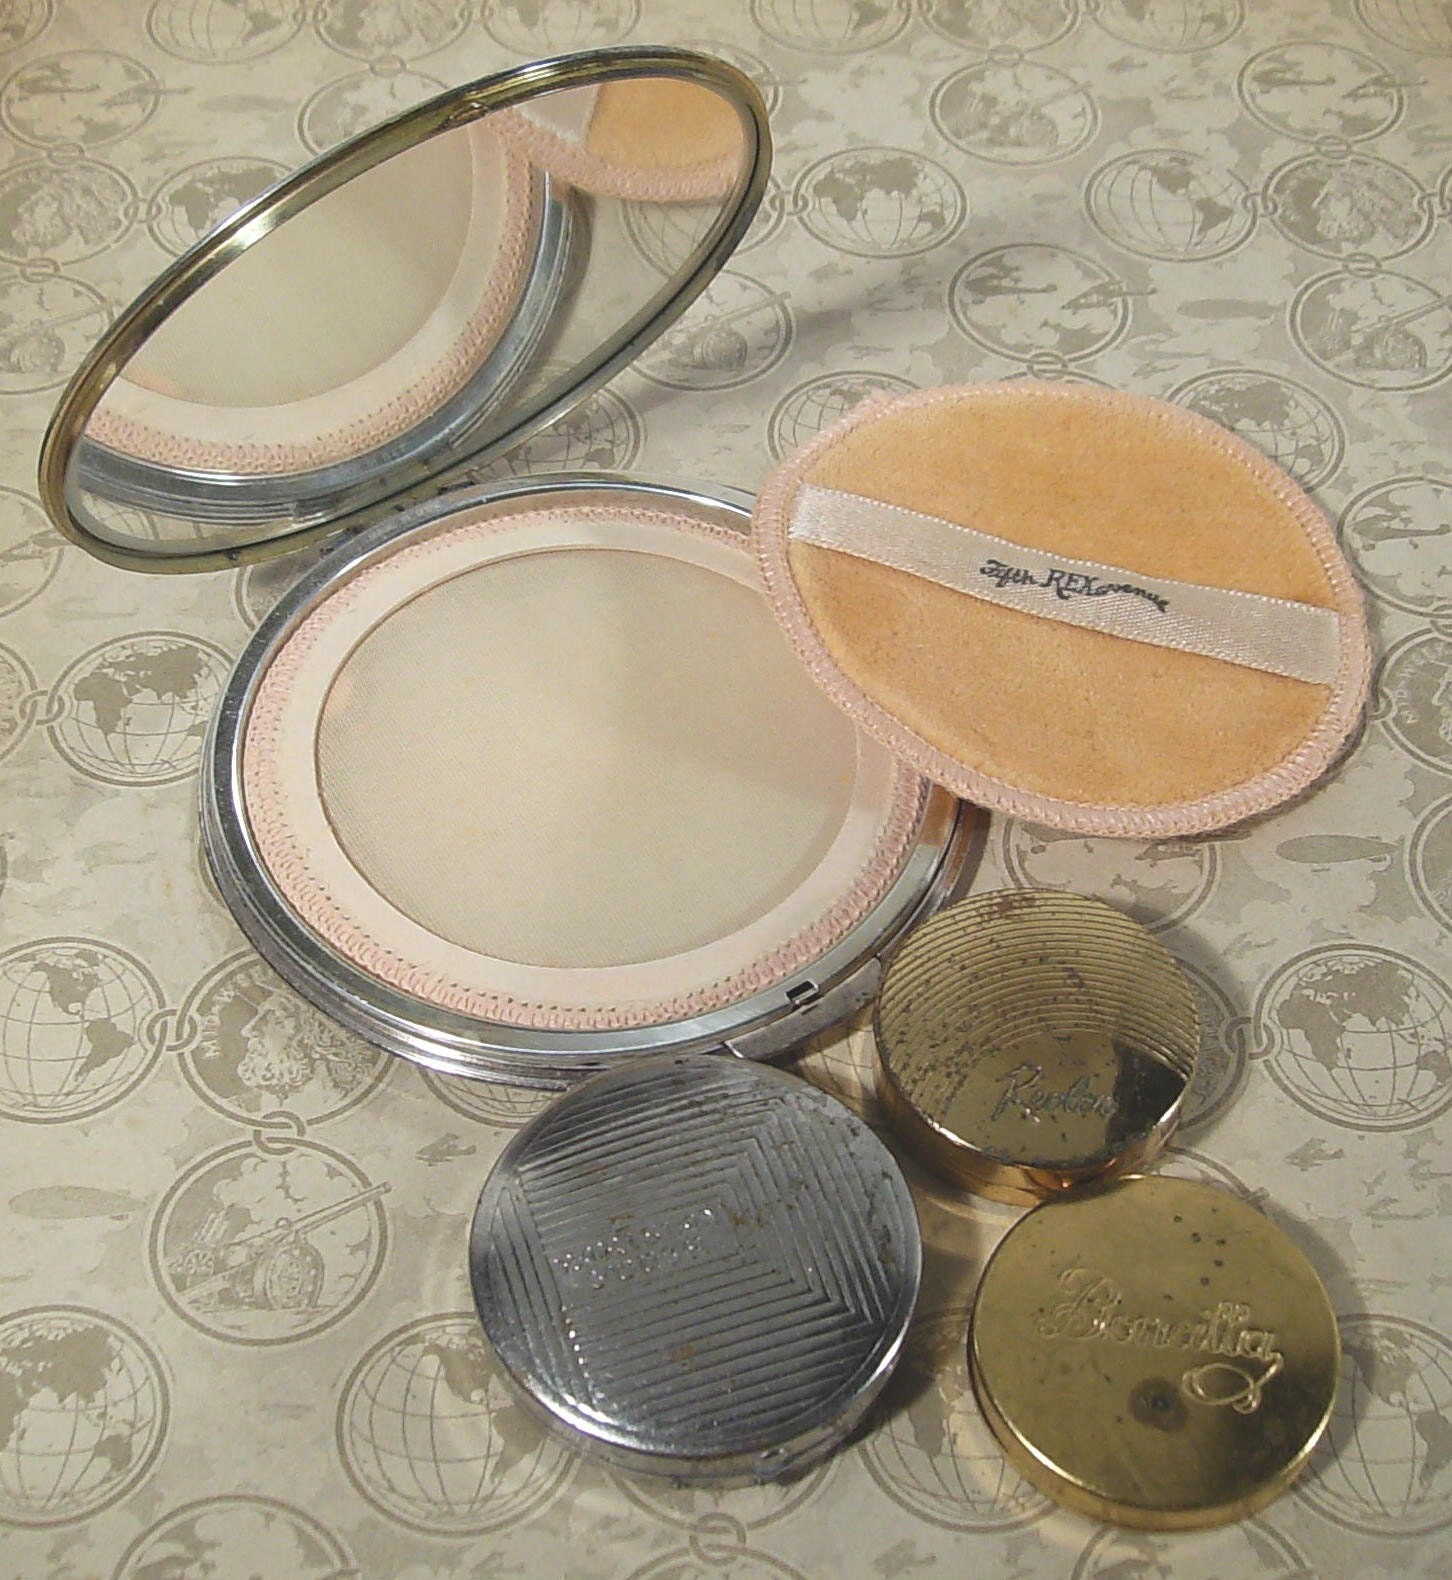 Lot 4 Vintage Old Cosmetic Compacts Revlon Parisian By Madampickay